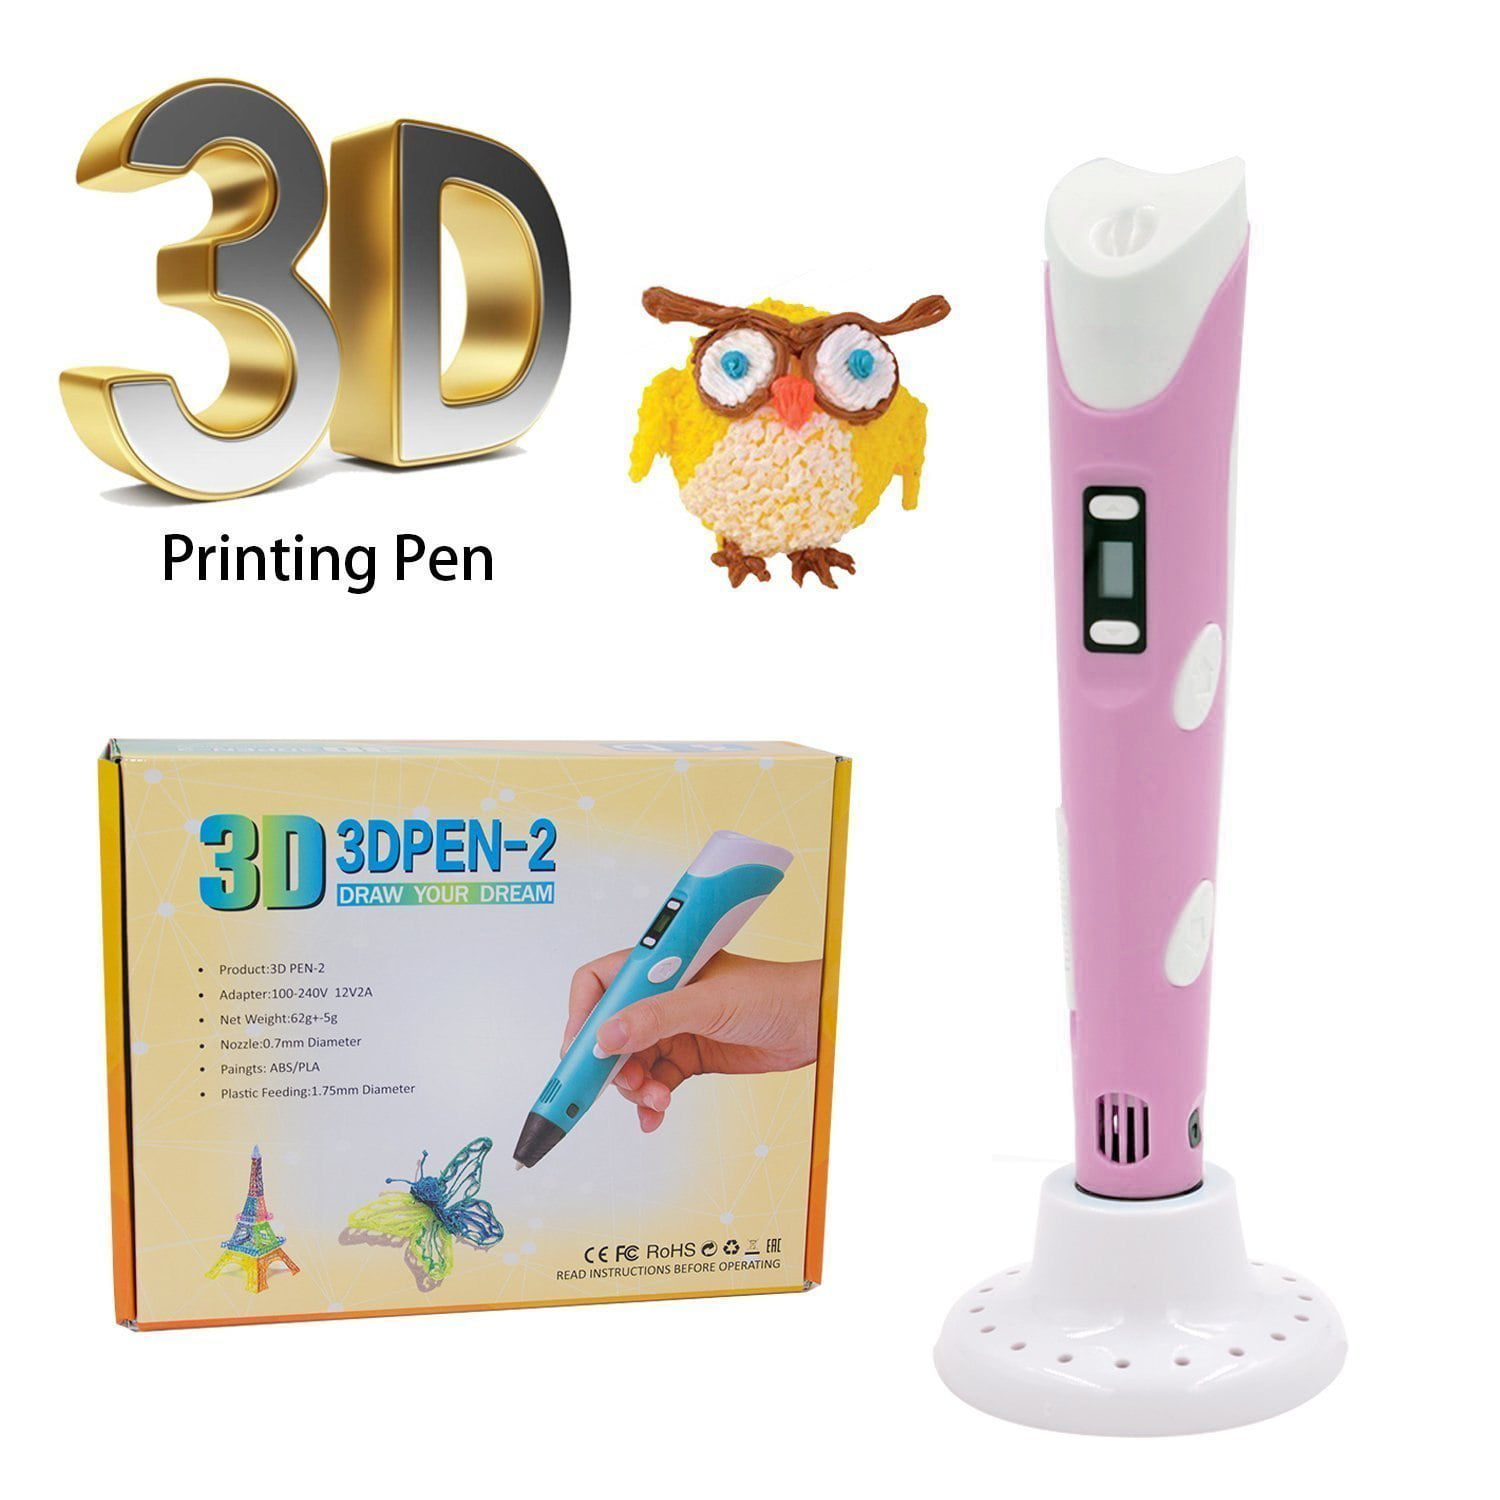 3D PEN-DRAW YOUR DREAM DRAWING ARTS CRAFTS DEVELOPED TECHNOLOGY INTELLIGENT PEN 